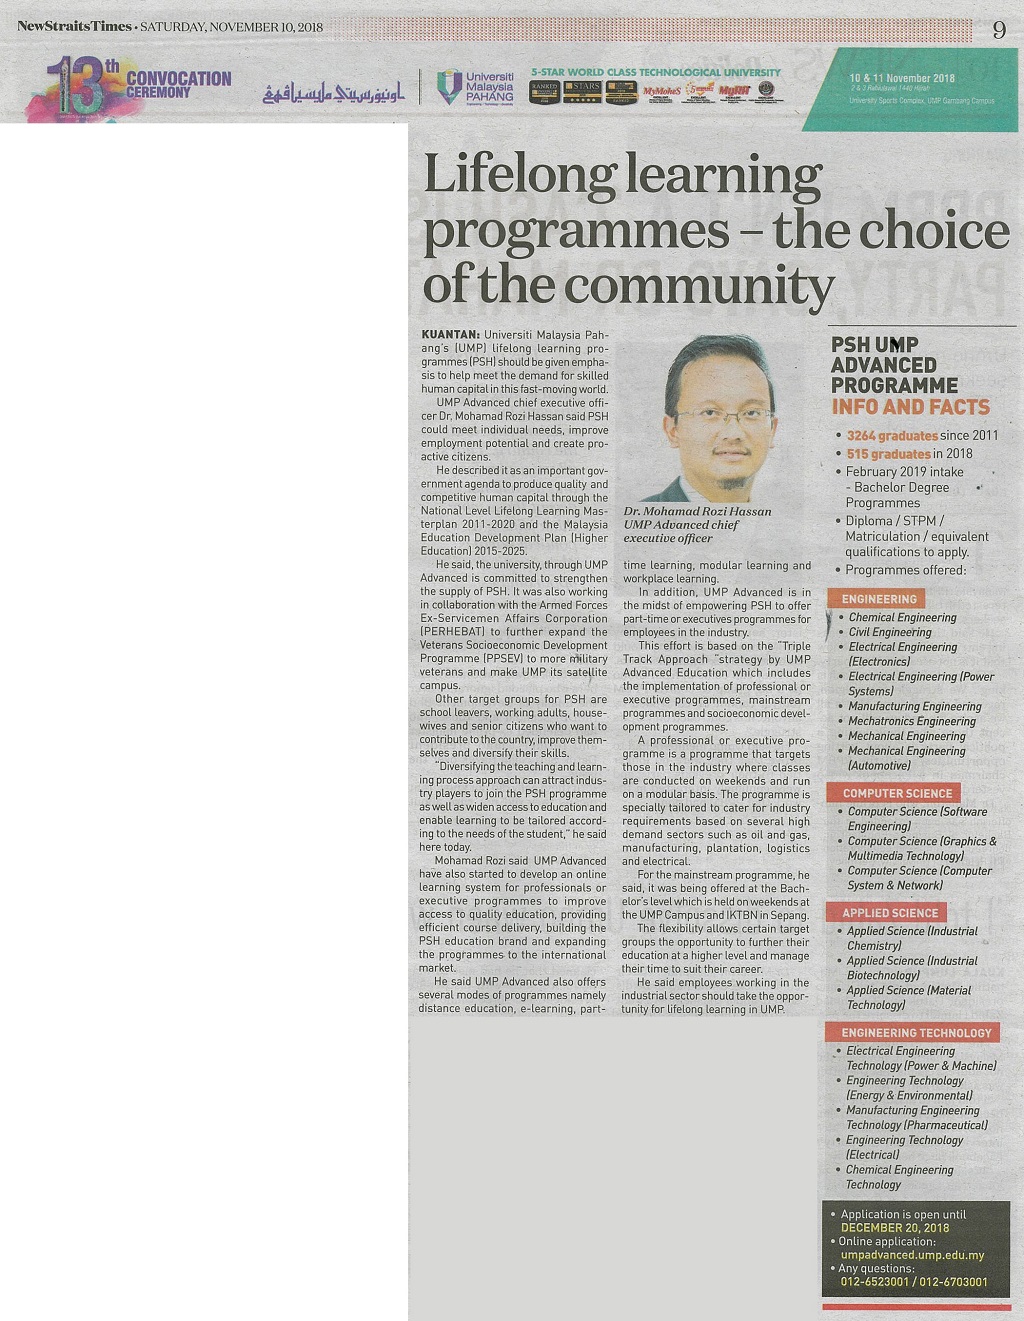 Lifelong learning programmes - the choice of the community 